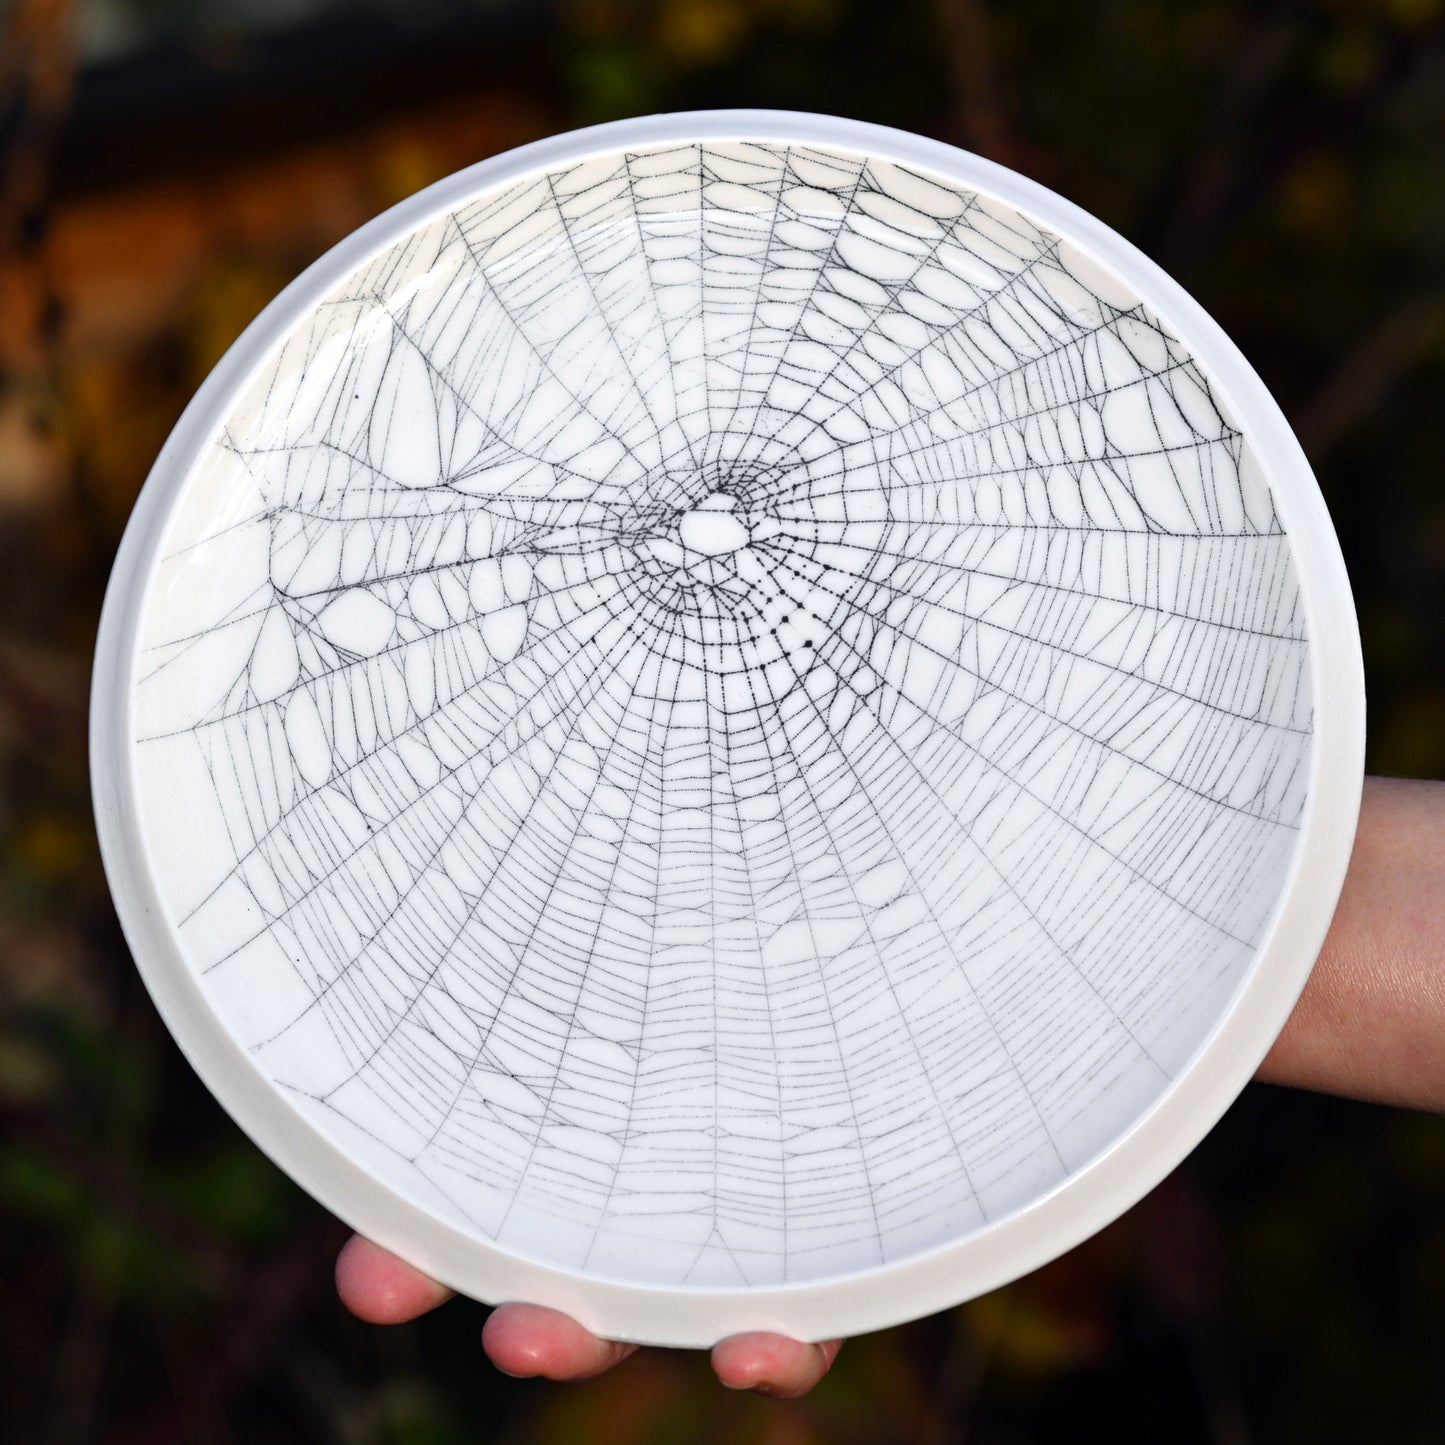 Web on Clay (234), Collected September 21, 2022